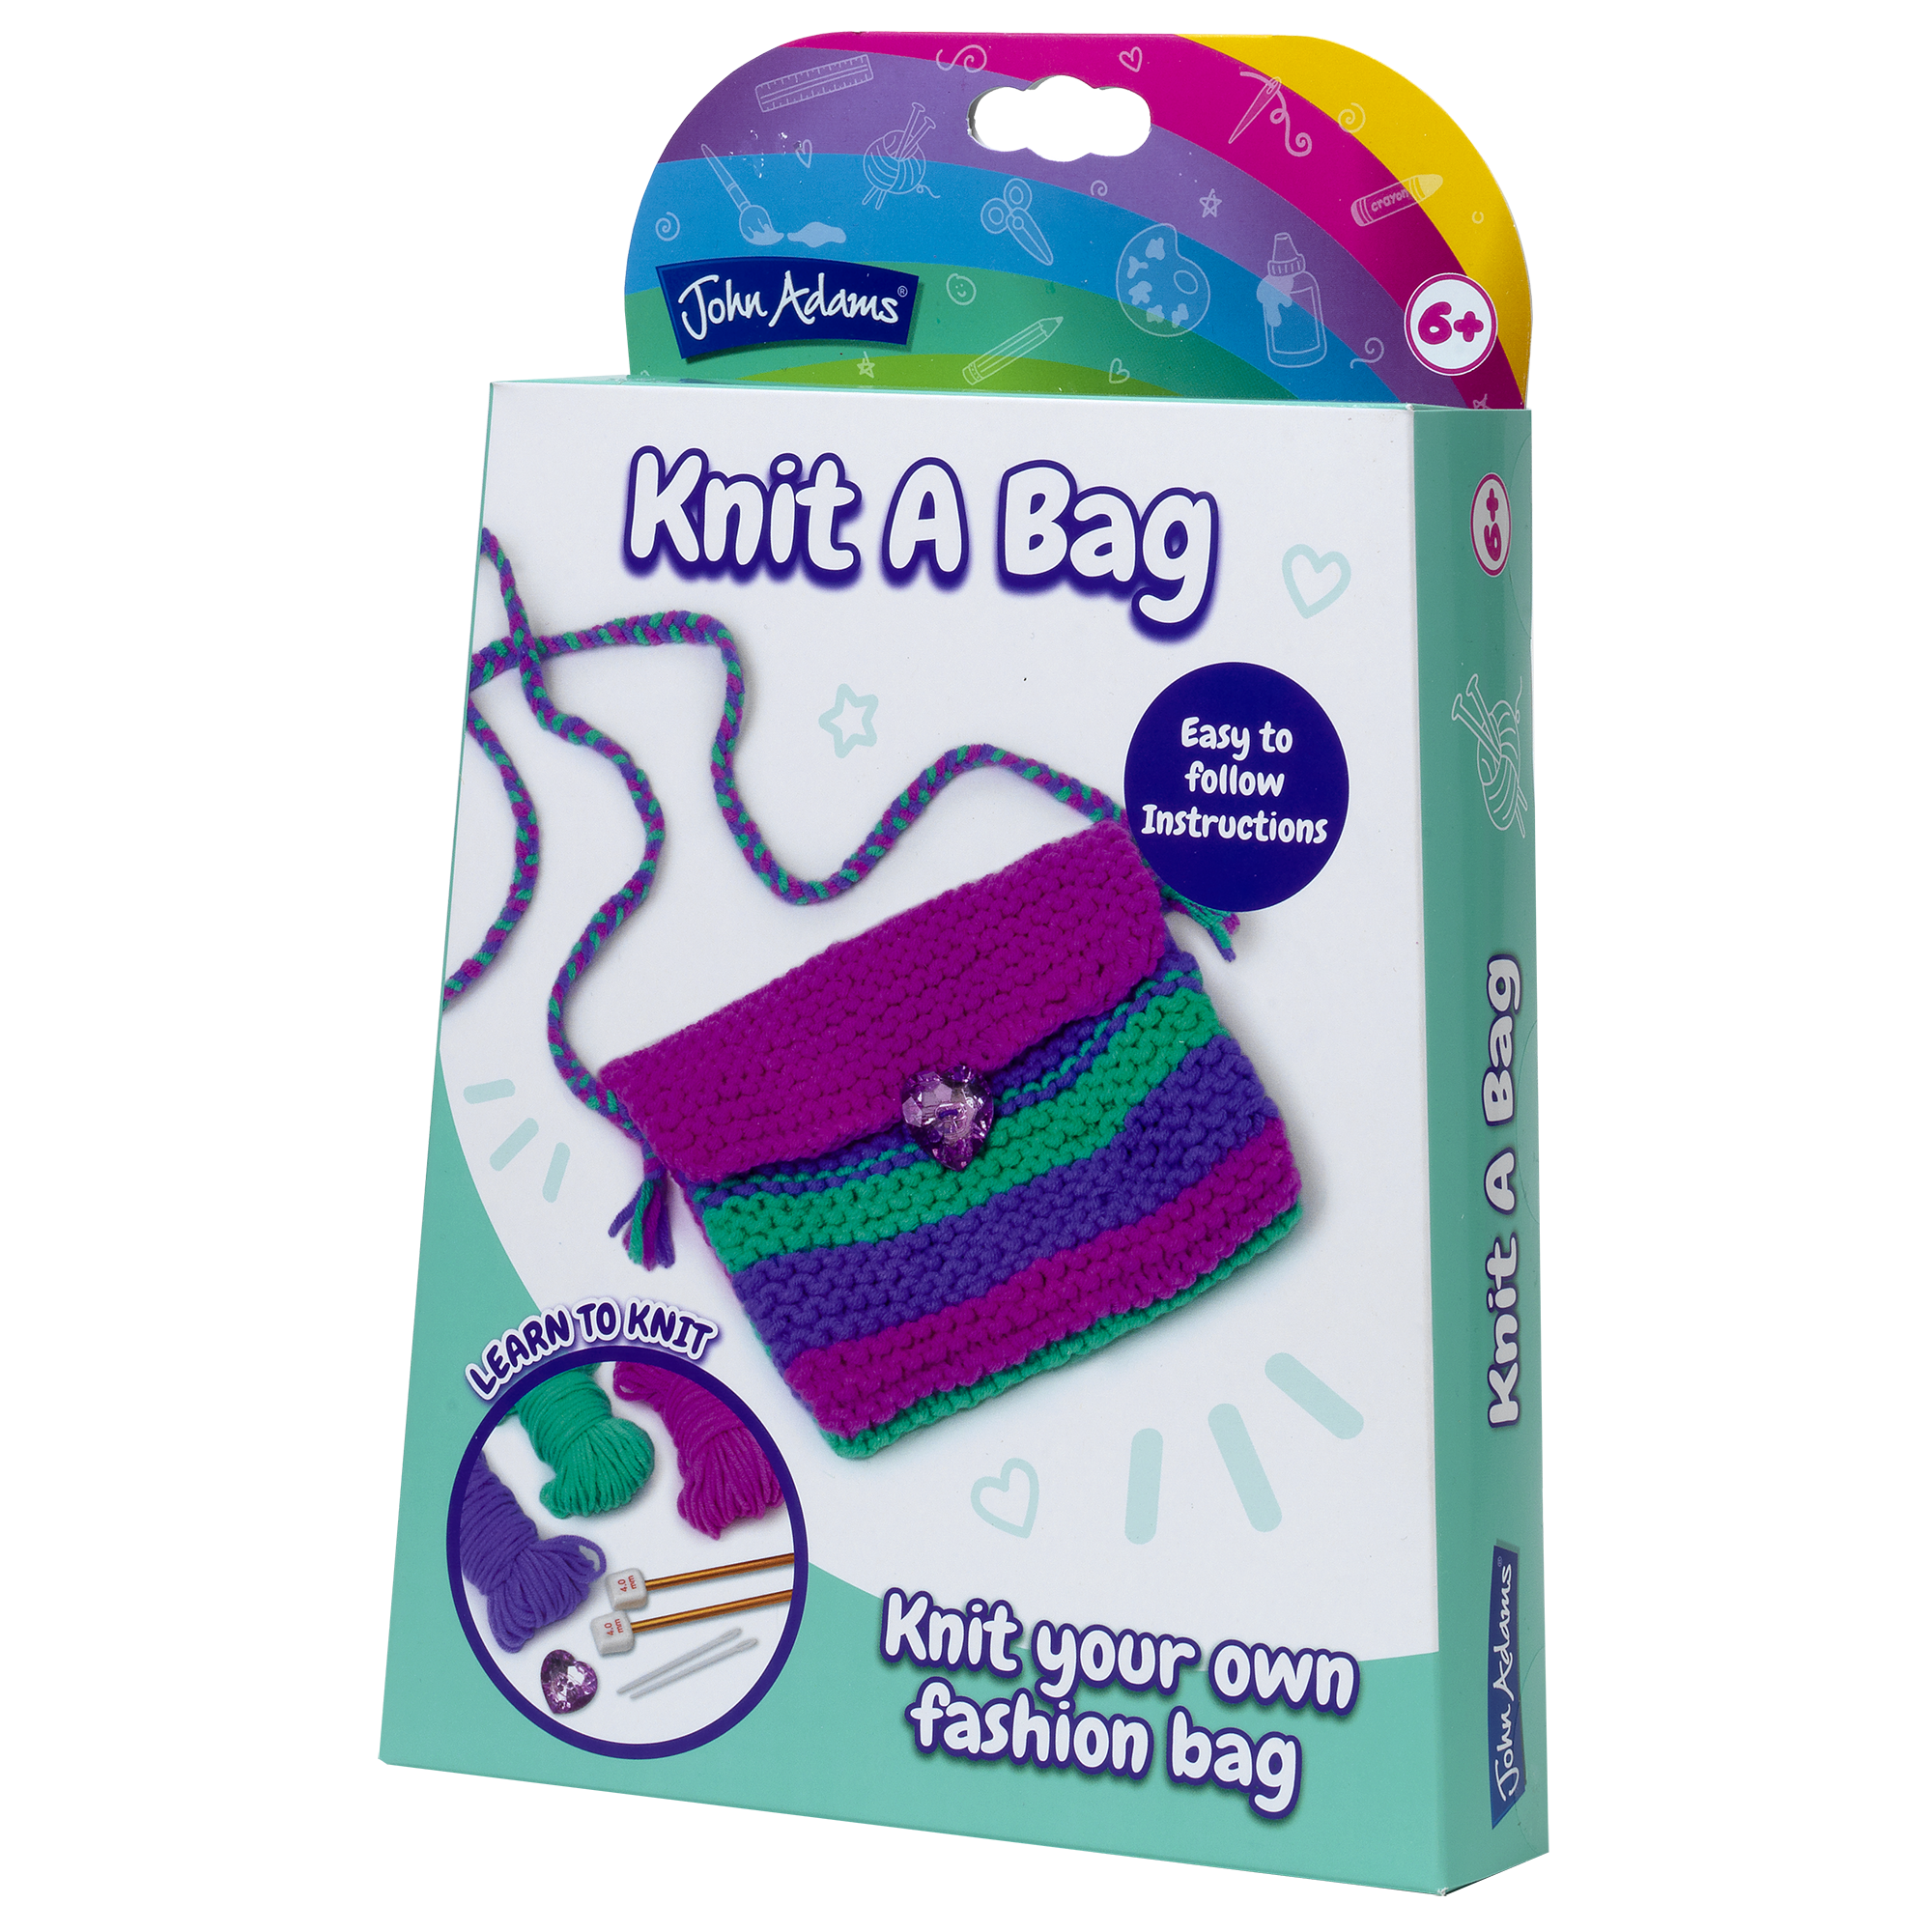 Knit Your Own Knit a Bag